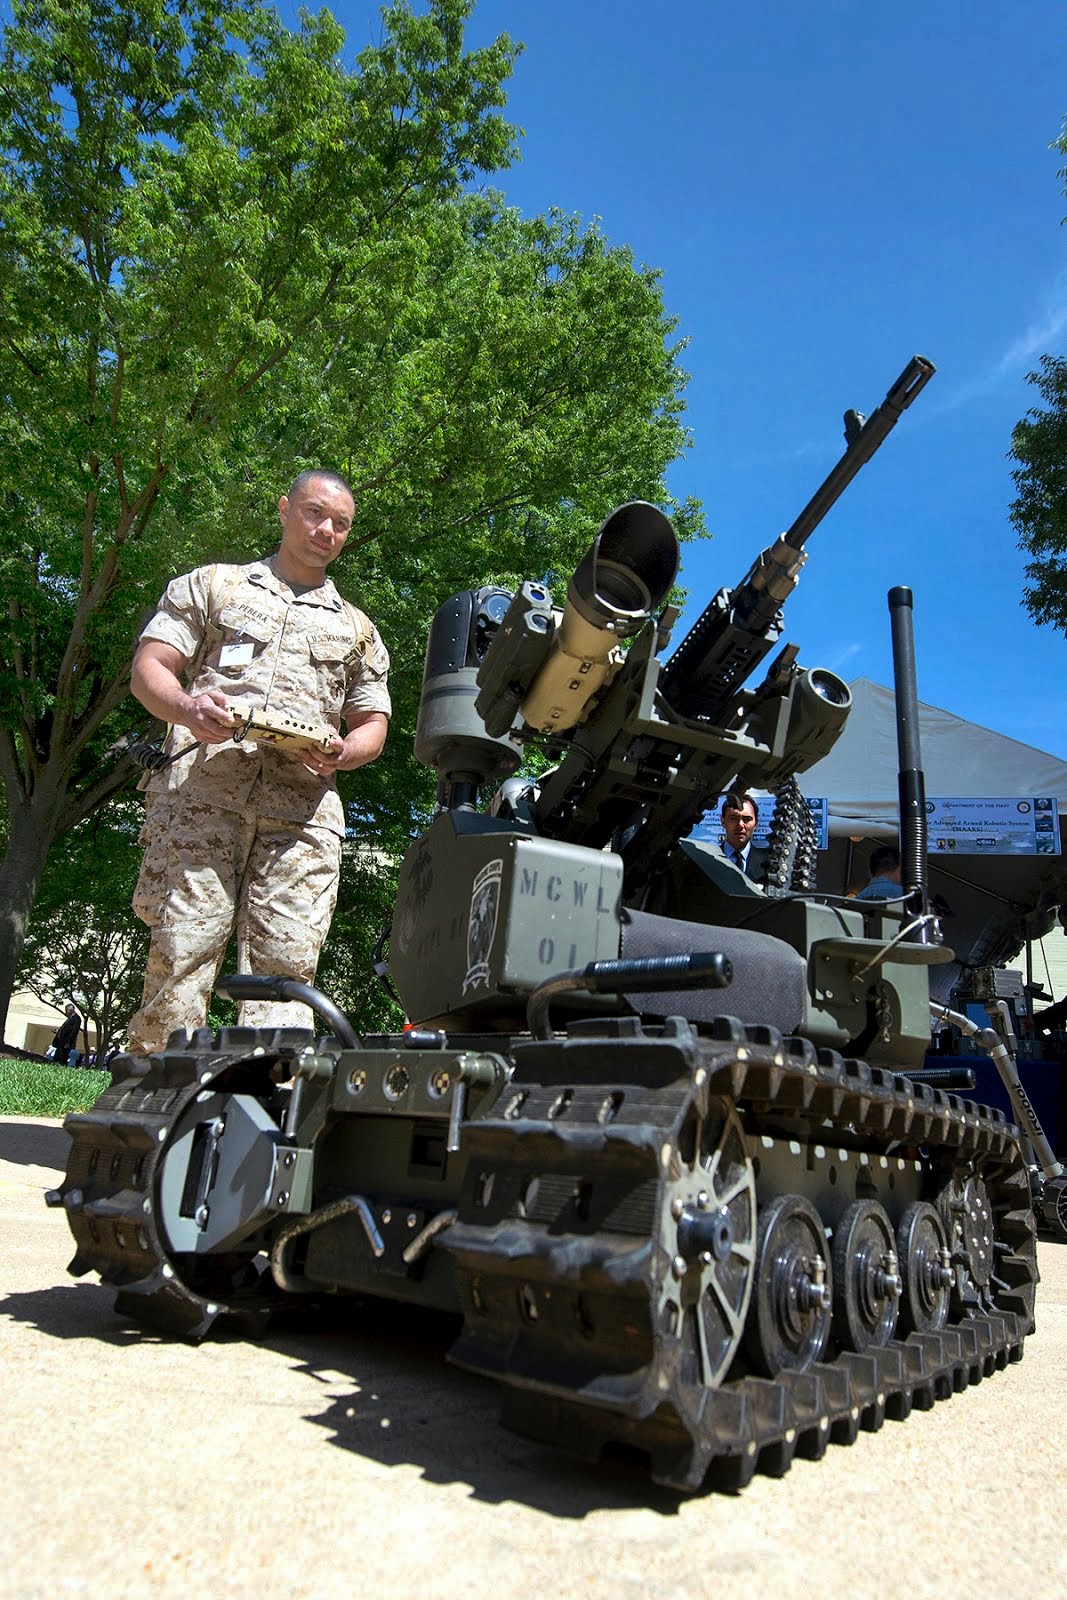 MILITARY ROBOT DISPLAYED AT DOD LAB DAY